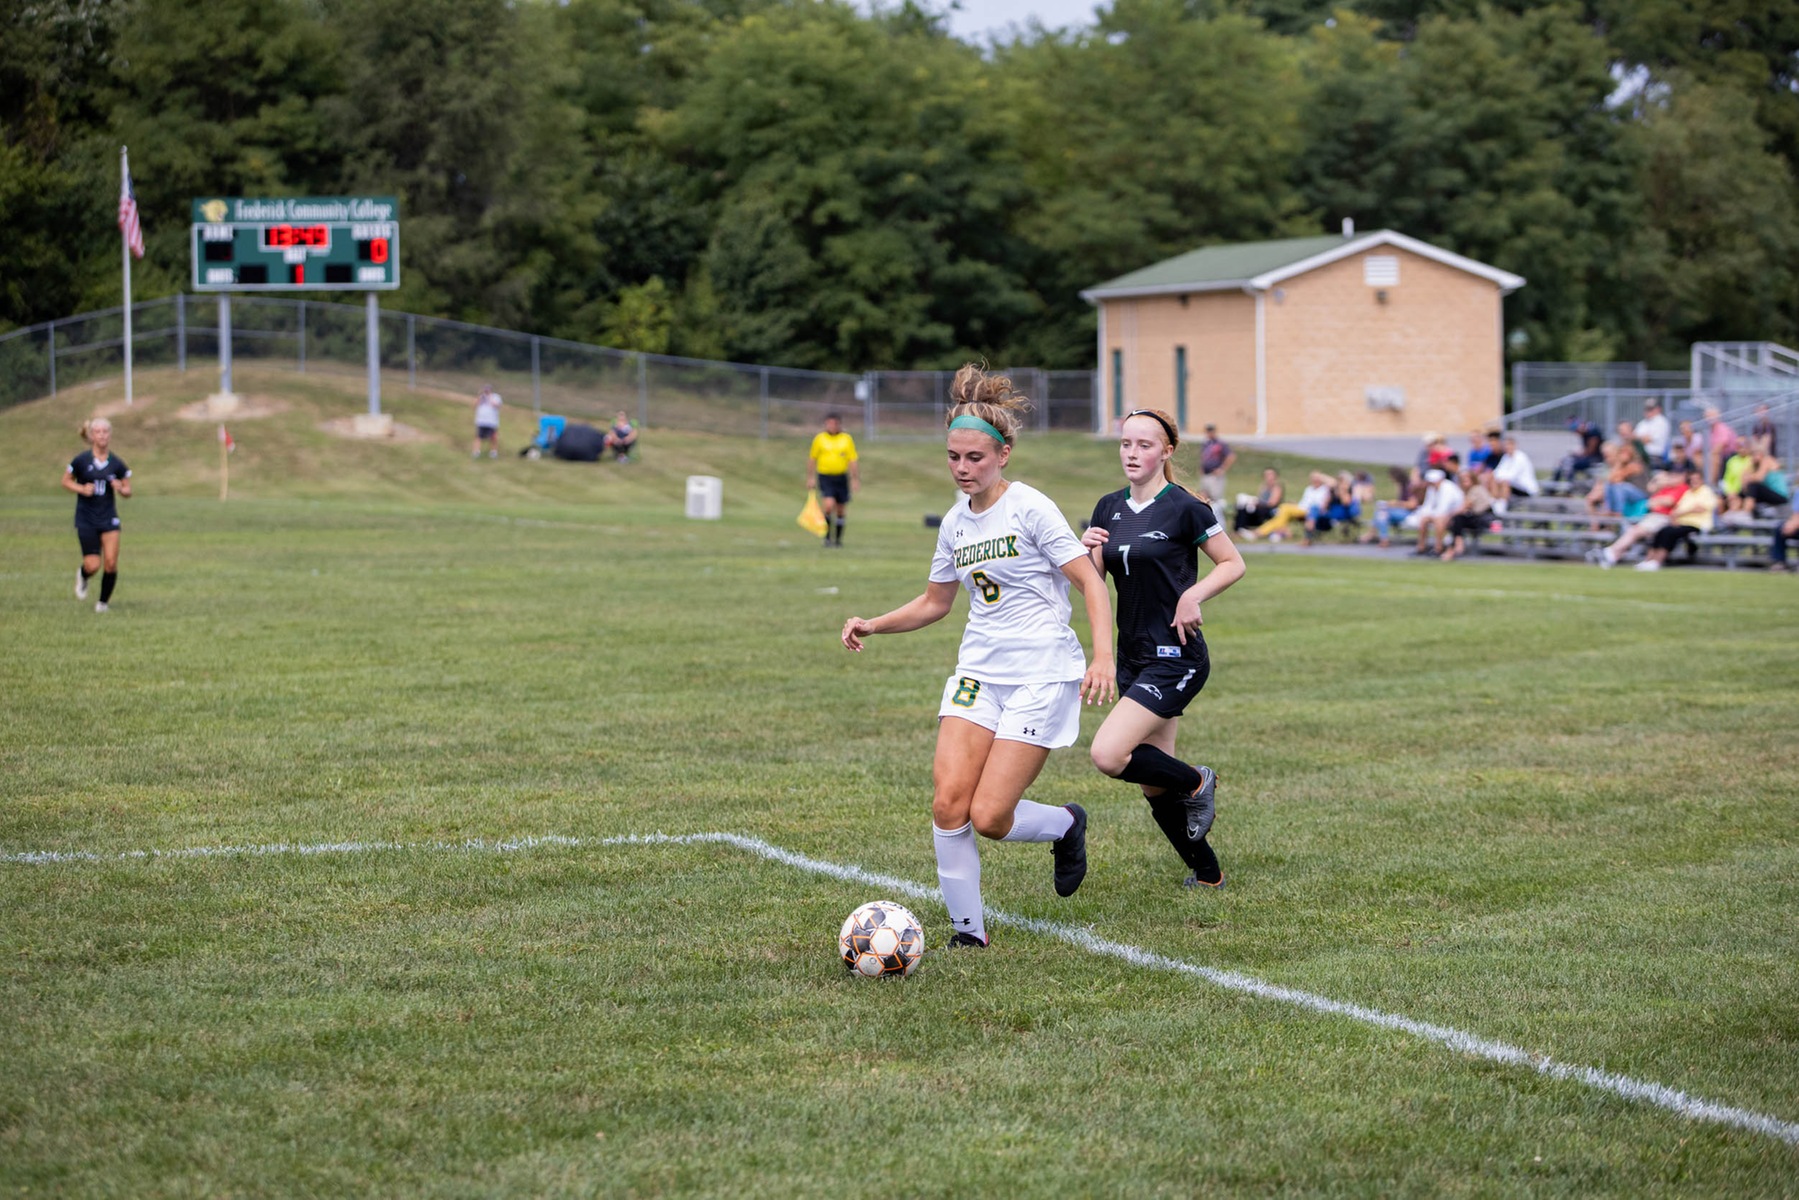 Women’s Soccer Closes Out Regular Season With Win Over Catamounts